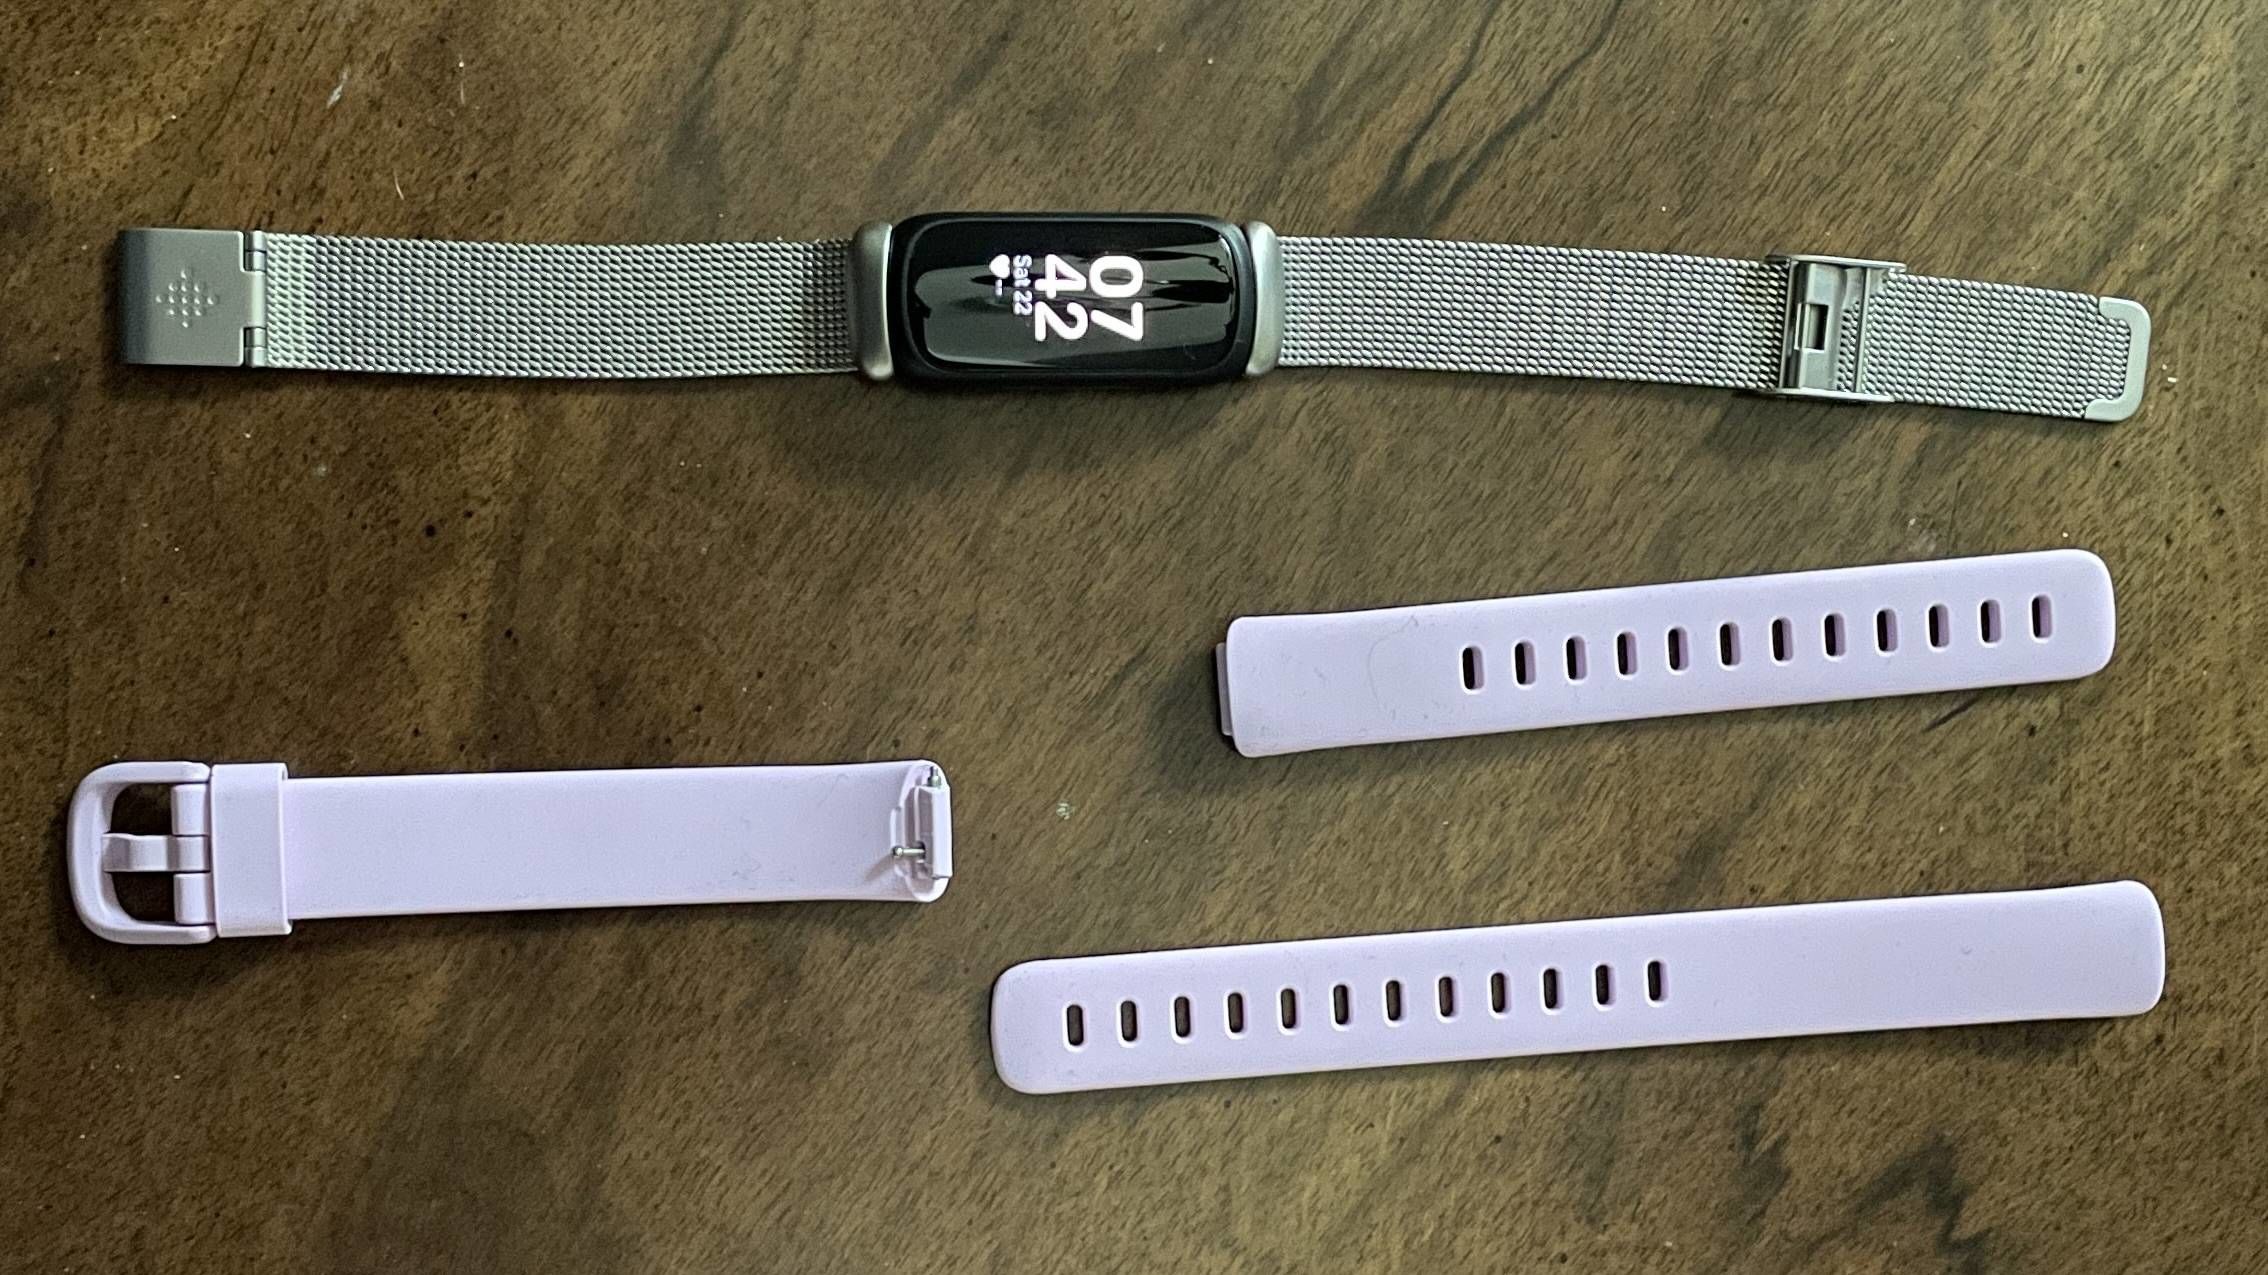 Fitbit Inspire 3 review: Aching belly instead of a six pack